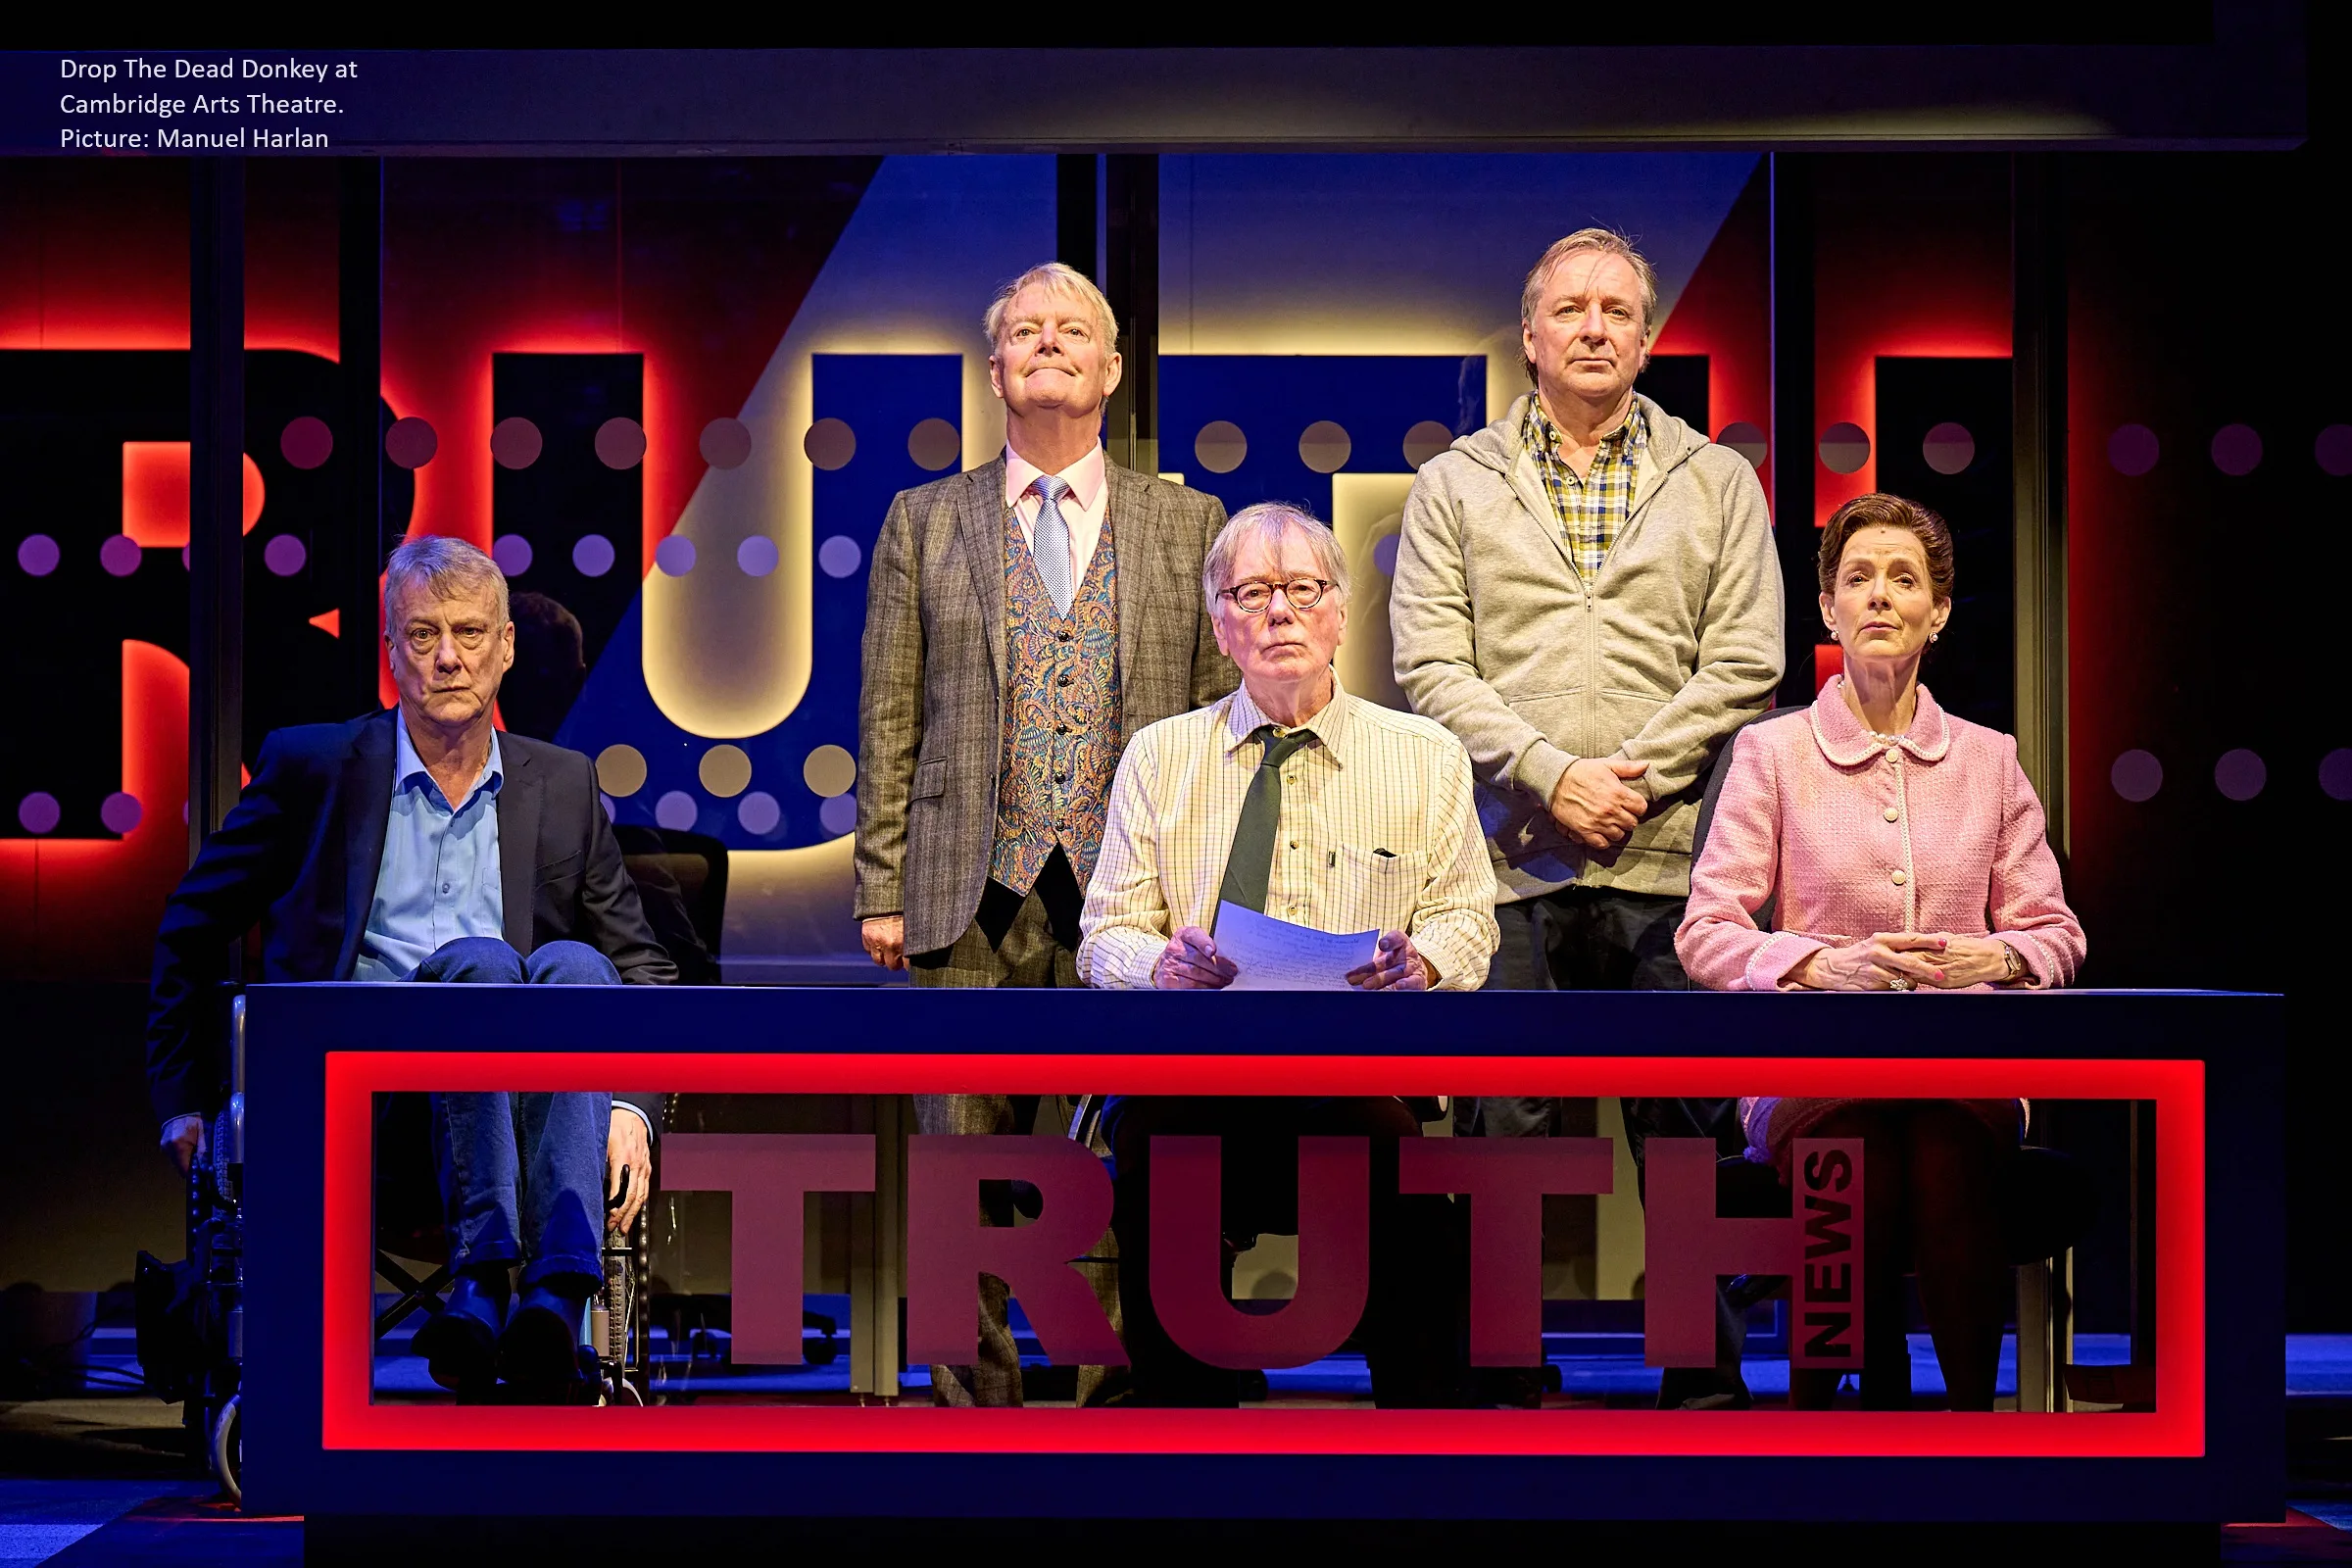 Drop The Dead Donkey is at Cambridge Arts Theatre until Saturday, March 2. Then touring.